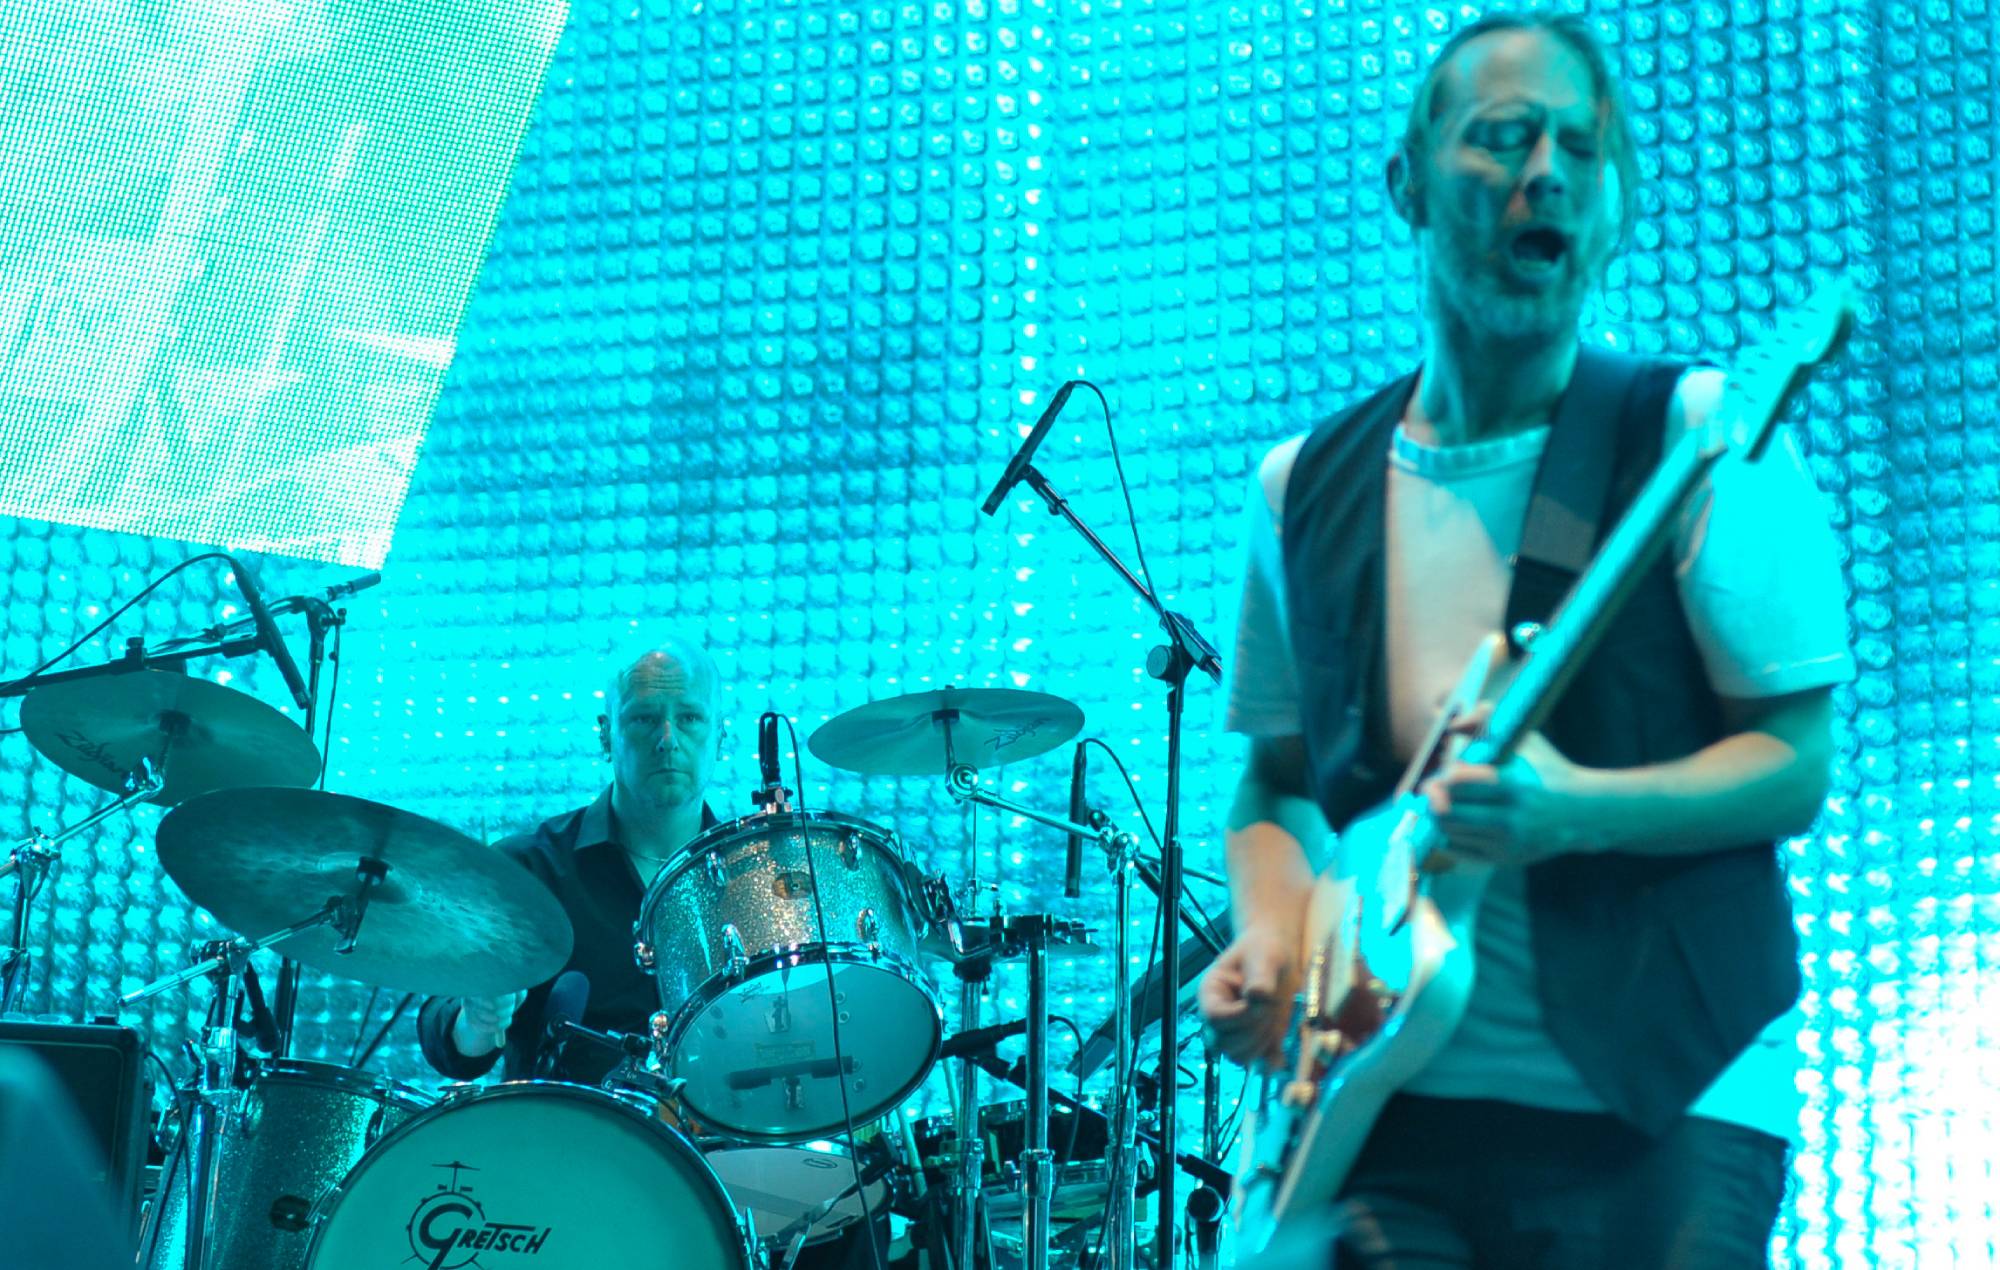 Philip Selway and Thom Yorke of Radiohead performing live on stage